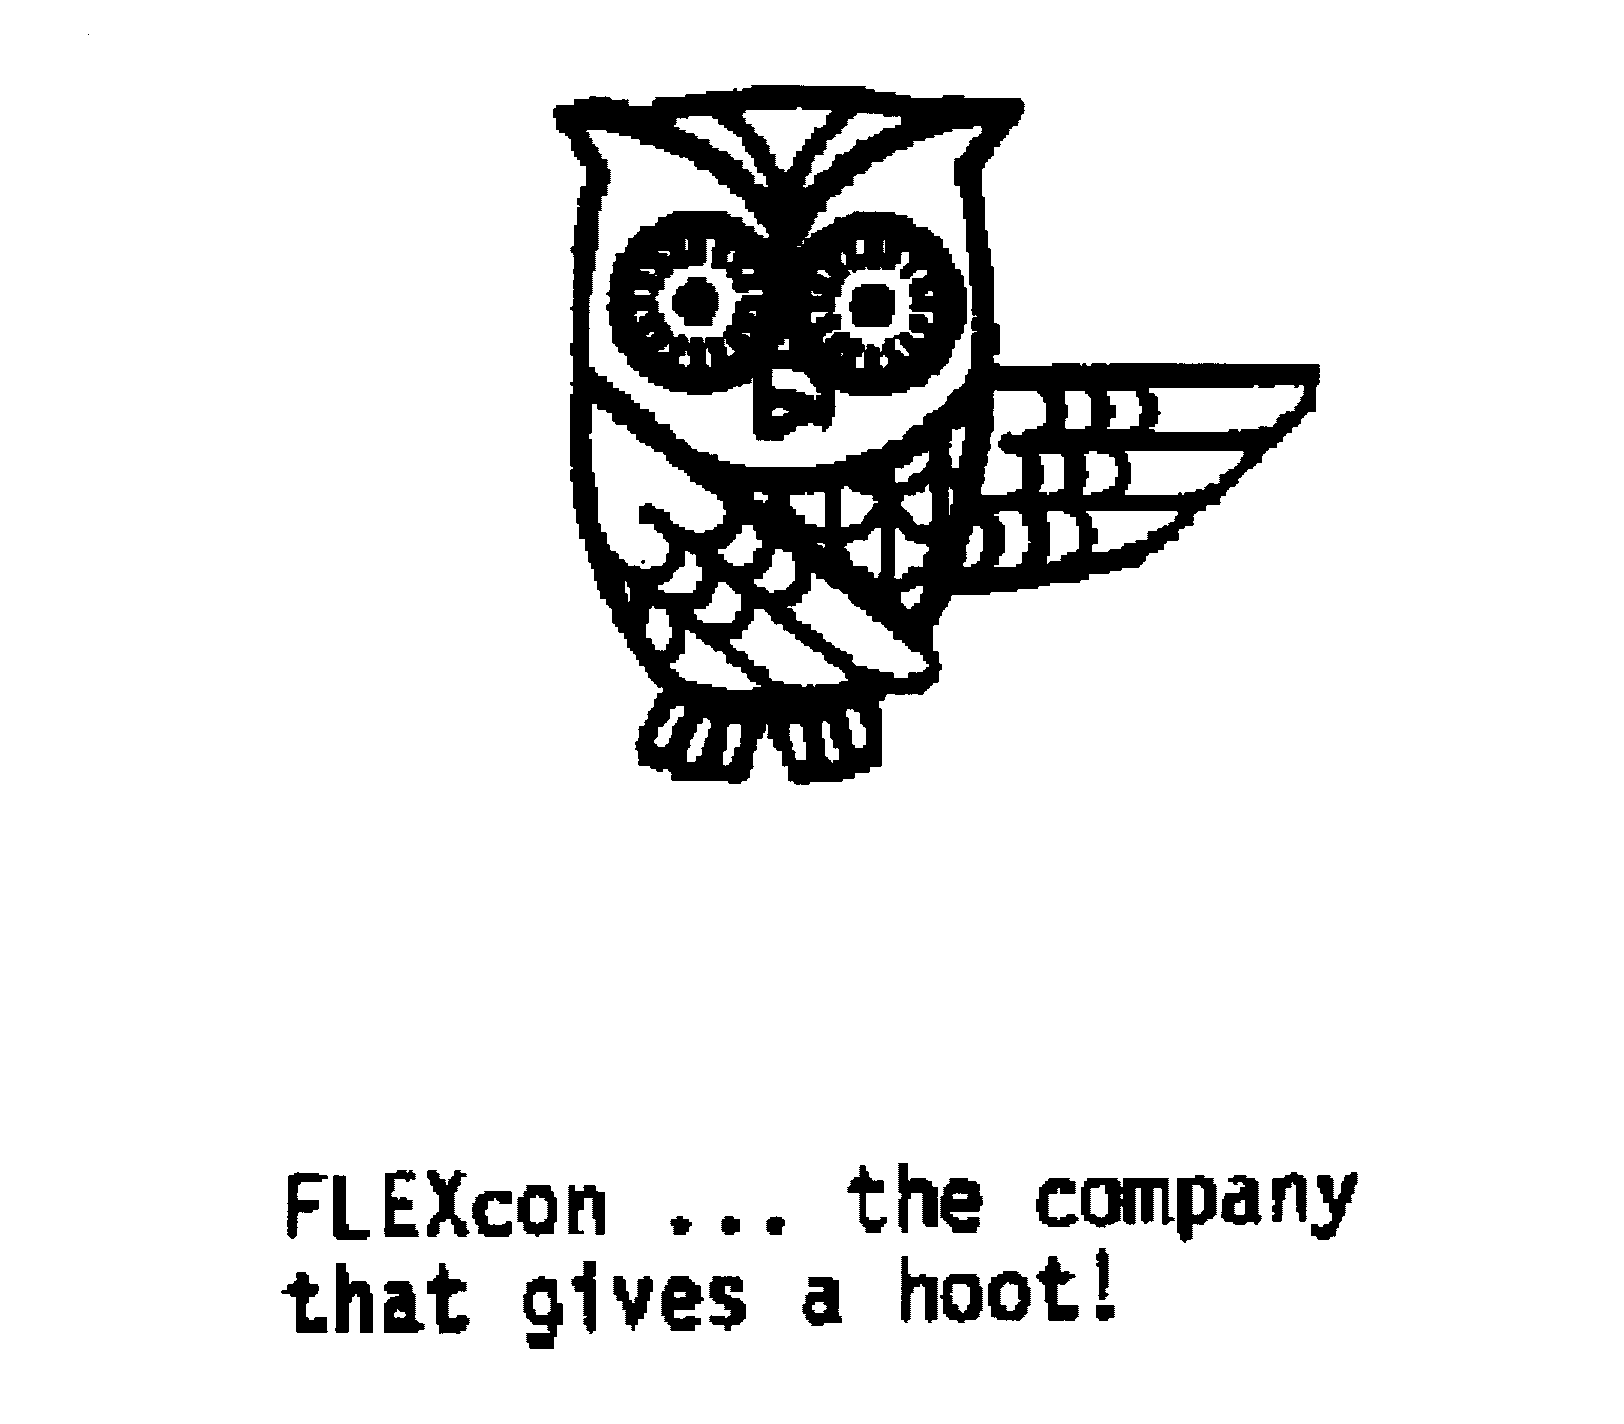  FLEXCON ... THE COMPANY THAT GIVES A HOOT ]